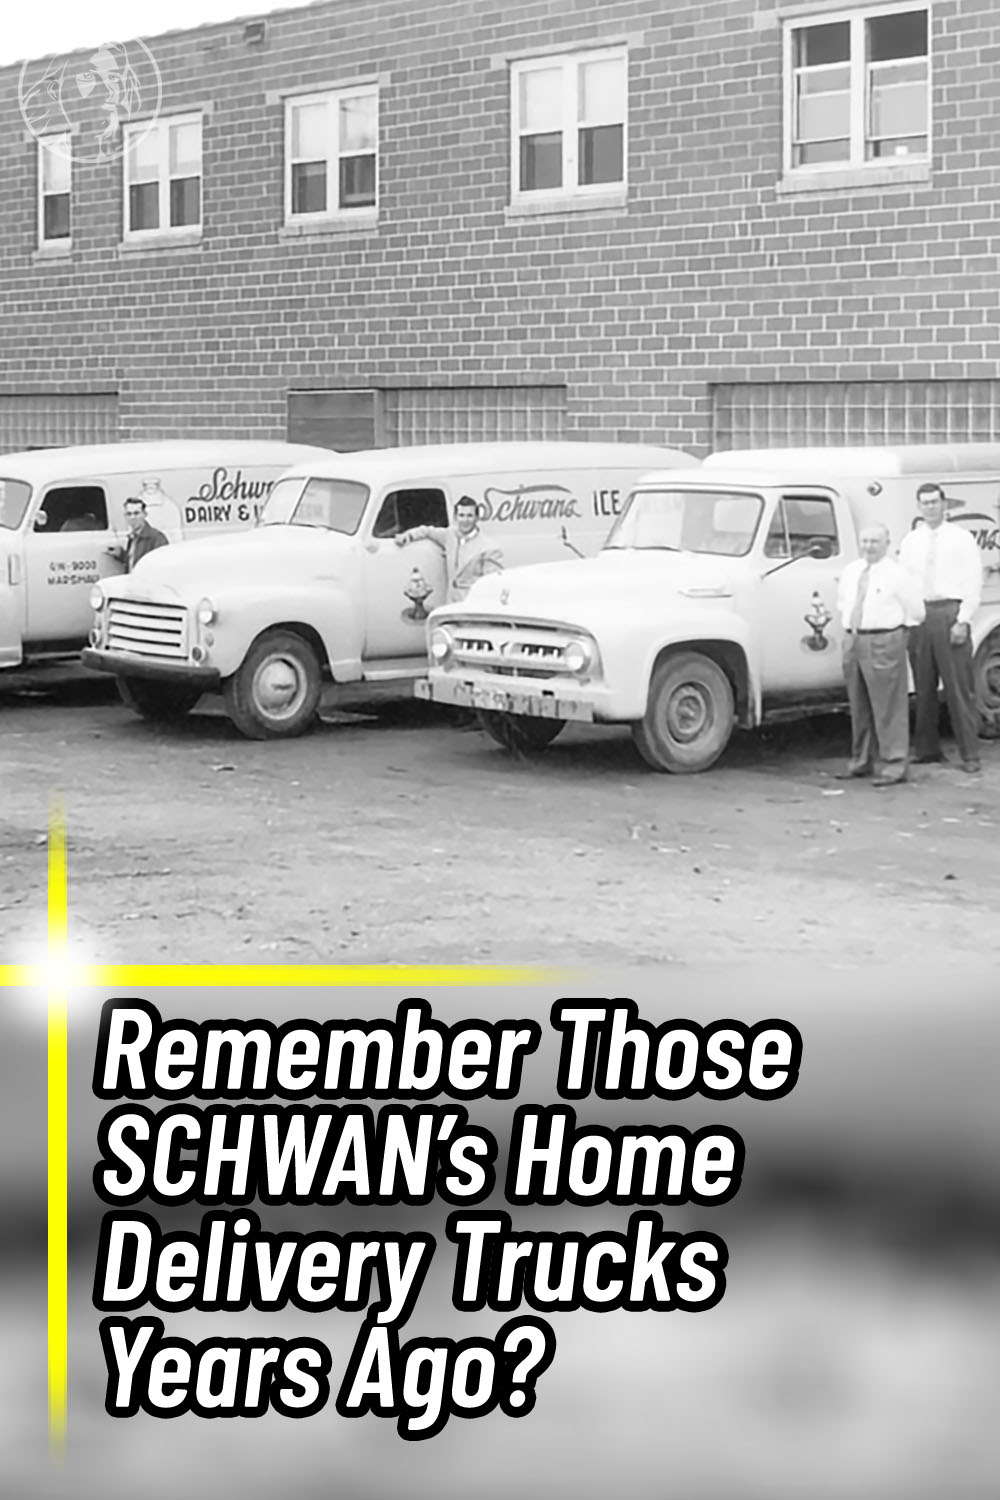 Remember Those SCHWAN’s Home Delivery Trucks Years Ago?